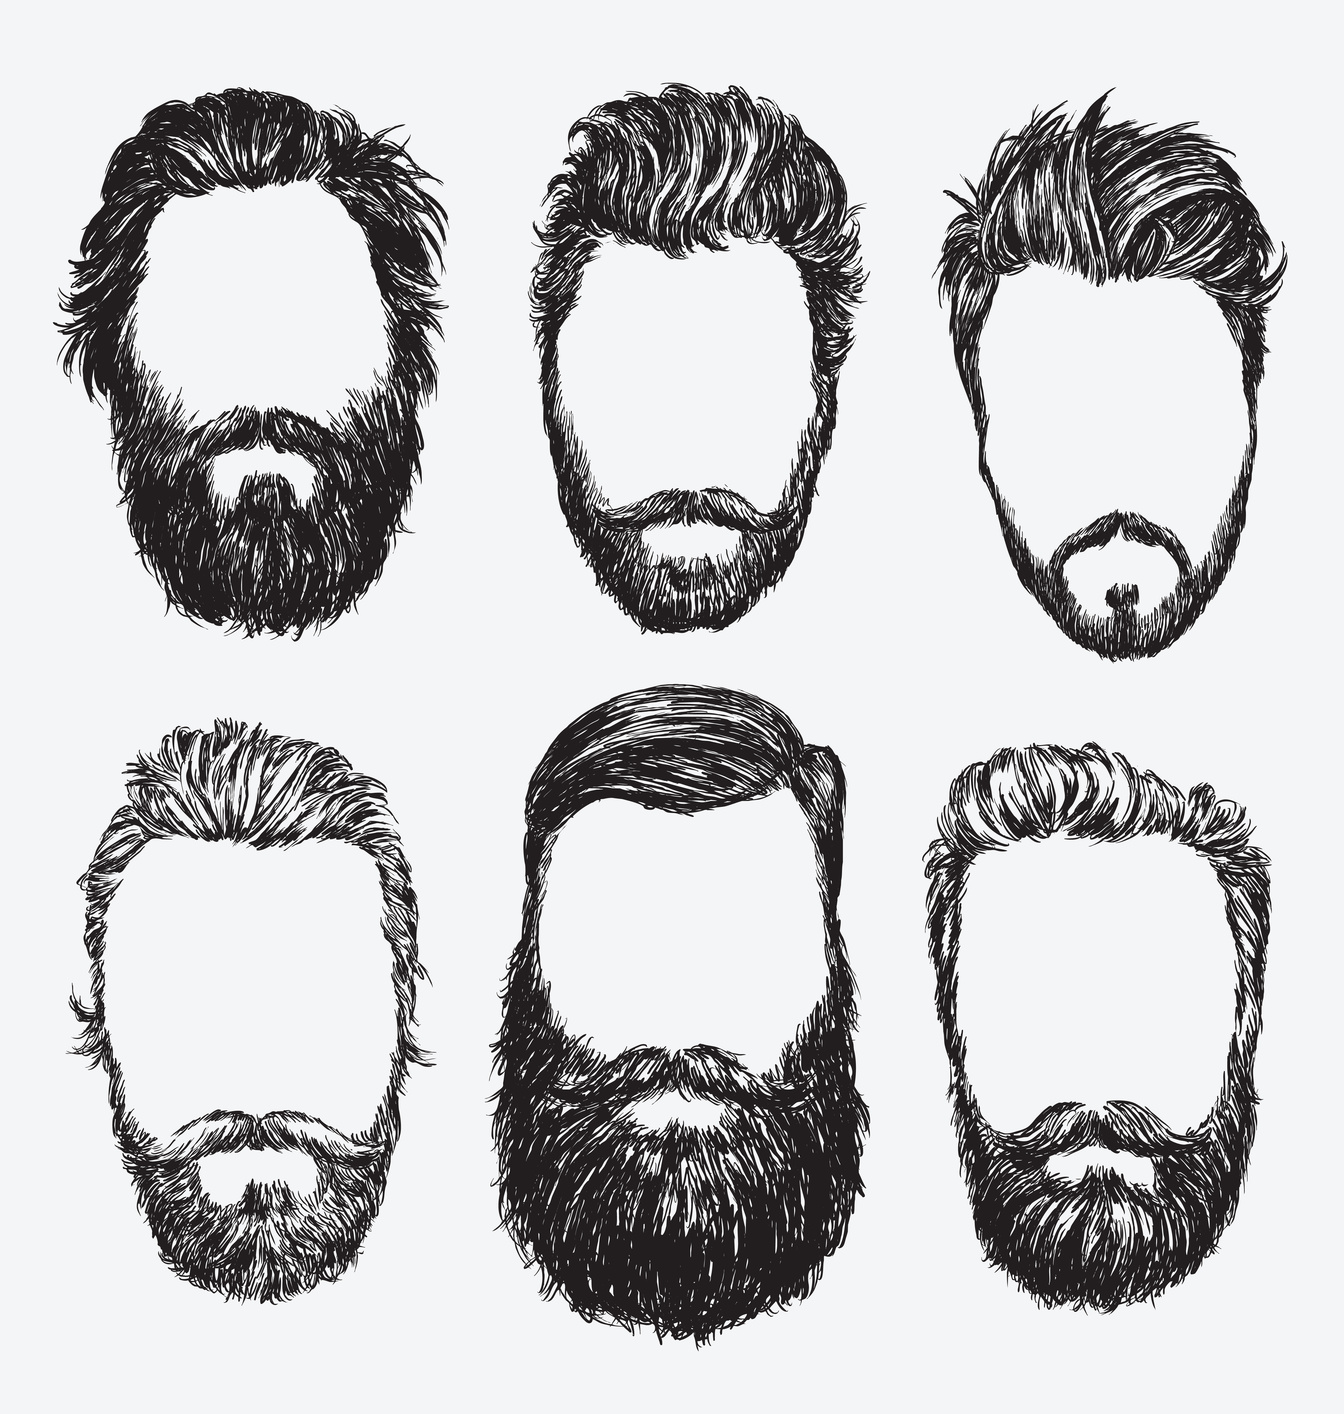 Hipster hair and beards, fashion vector illustration set.